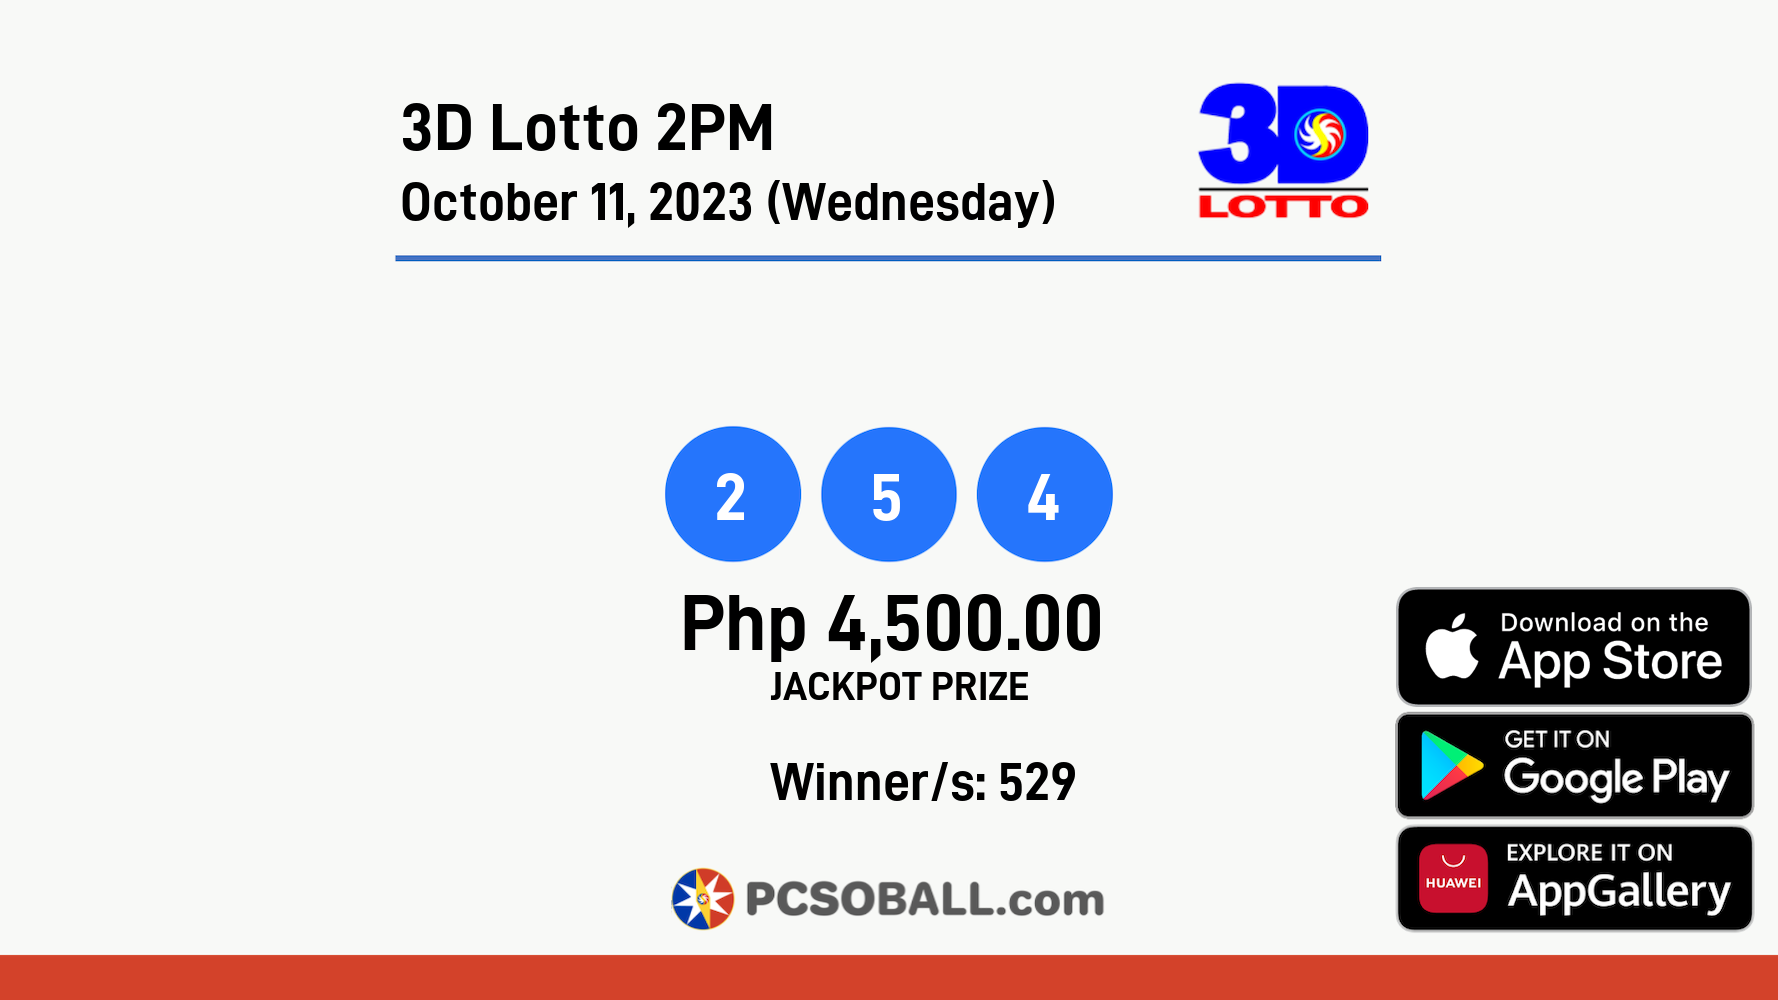 3D Lotto 2PM October 11, 2023 (Wednesday) Result